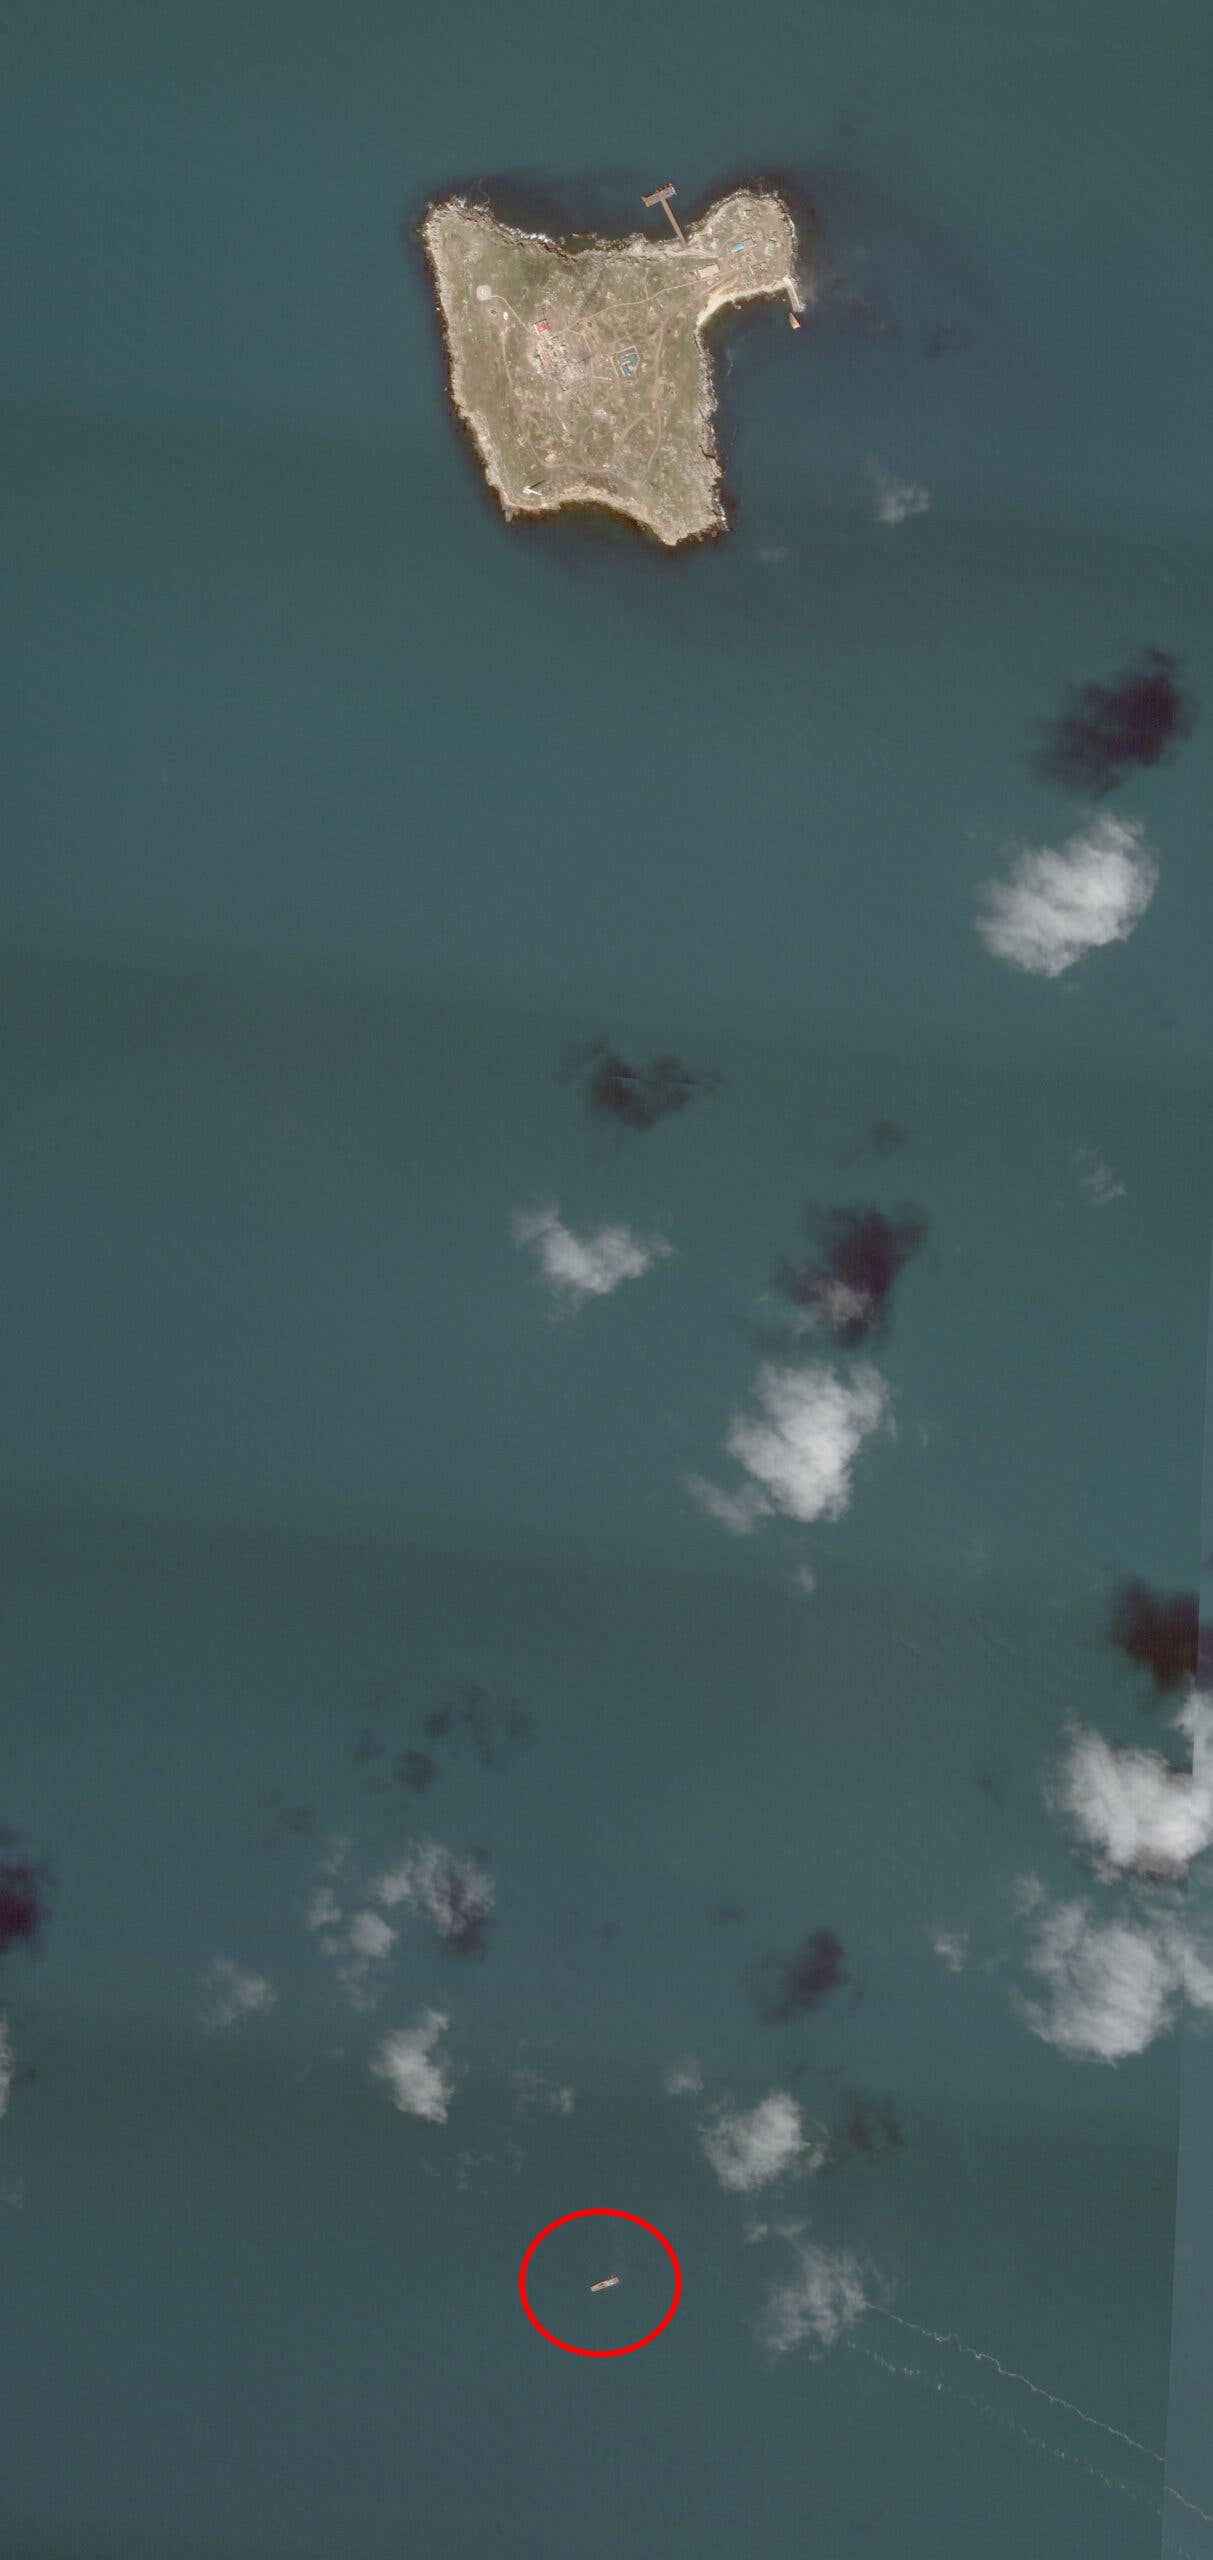 The vessel was about 1.7 miles south of the island seemingly stopped. PHOTO © 2022 PLANET LABS INC. ALL RIGHTS RESERVED. REPRINTED BY PERMISSION.